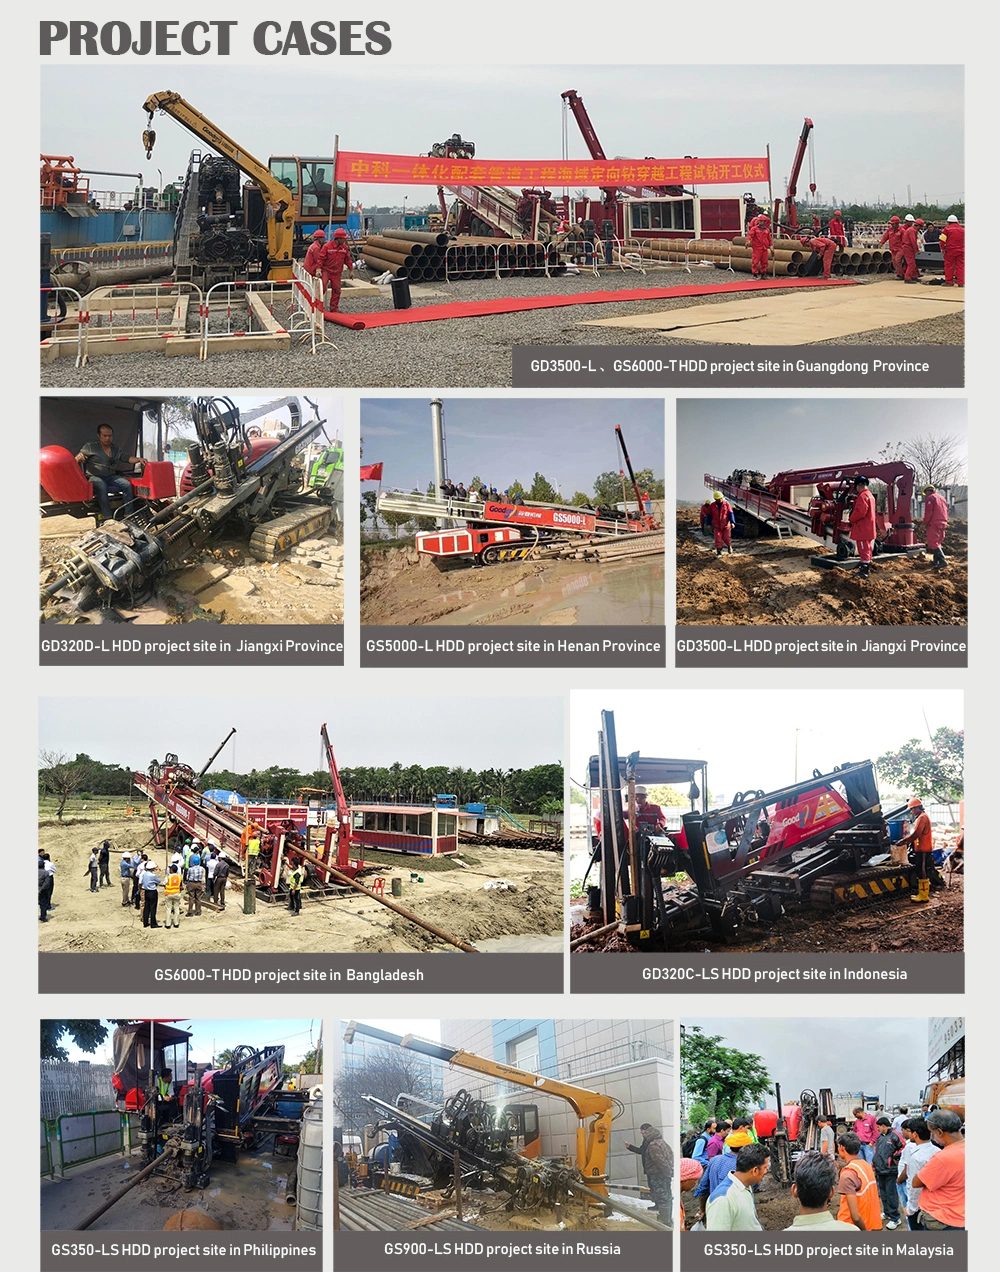 38T(B) goodeng trenchless pipe construction HDD rig drill rig